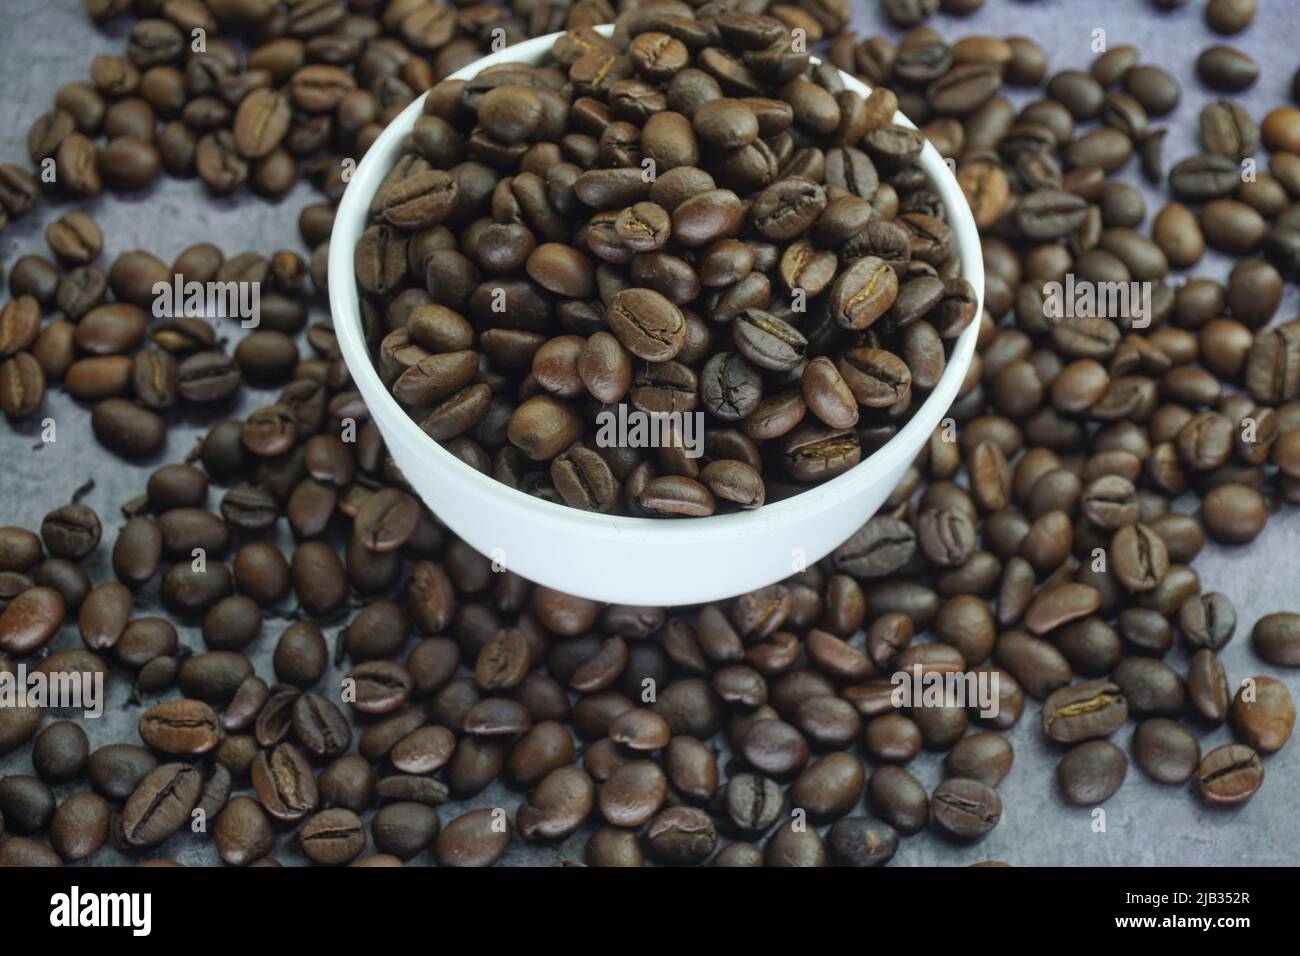 Roasted coffee beans in a background Stock Photo